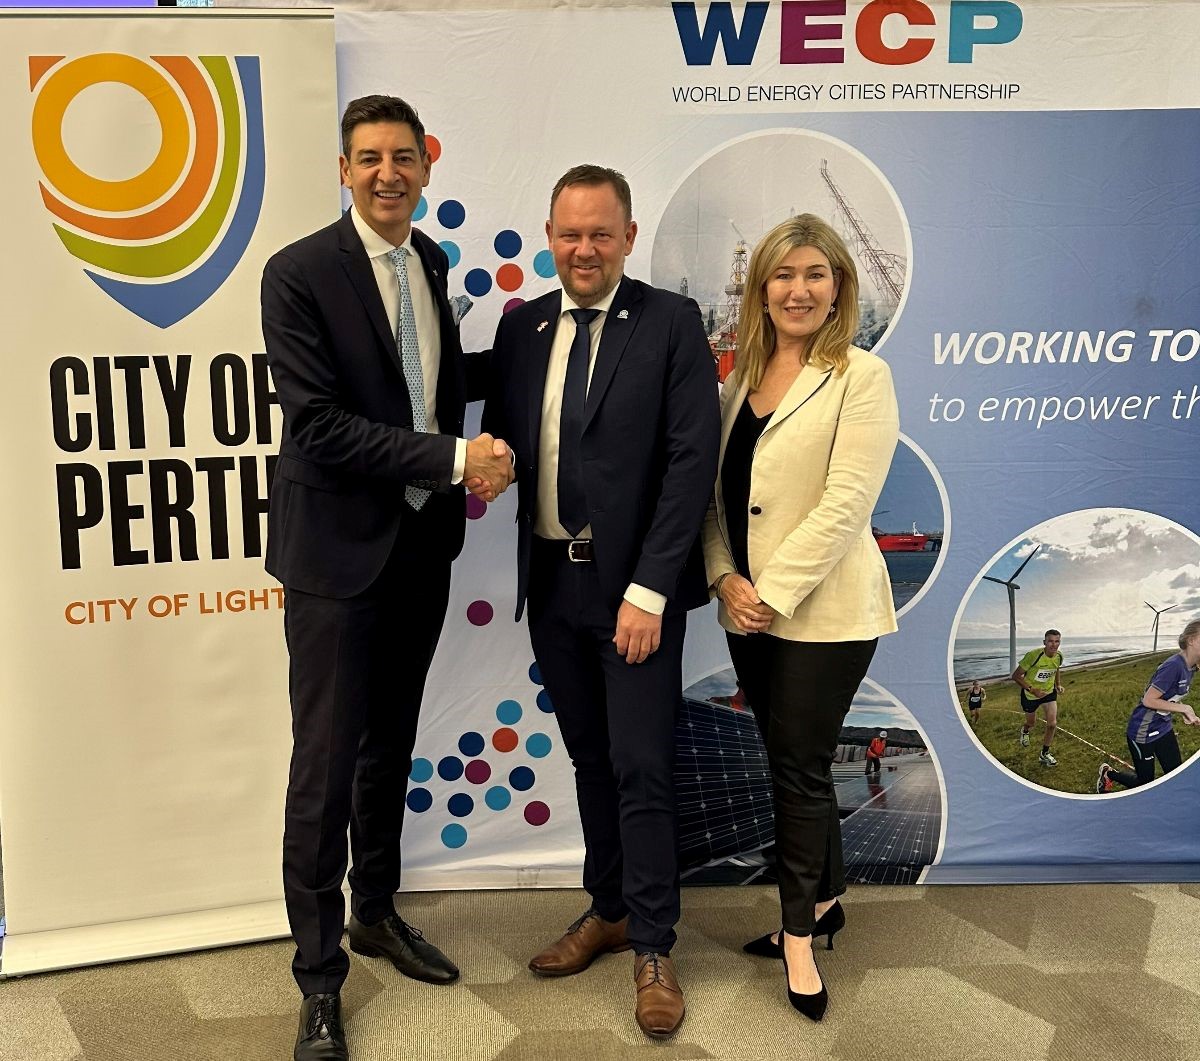 City of Perth Lord Mayor Basil Zempilas, WECP President Mayor Jesper Rasmussen from the City of Esbjerg, Denmark and City of Perth CEO Michelle Reynolds